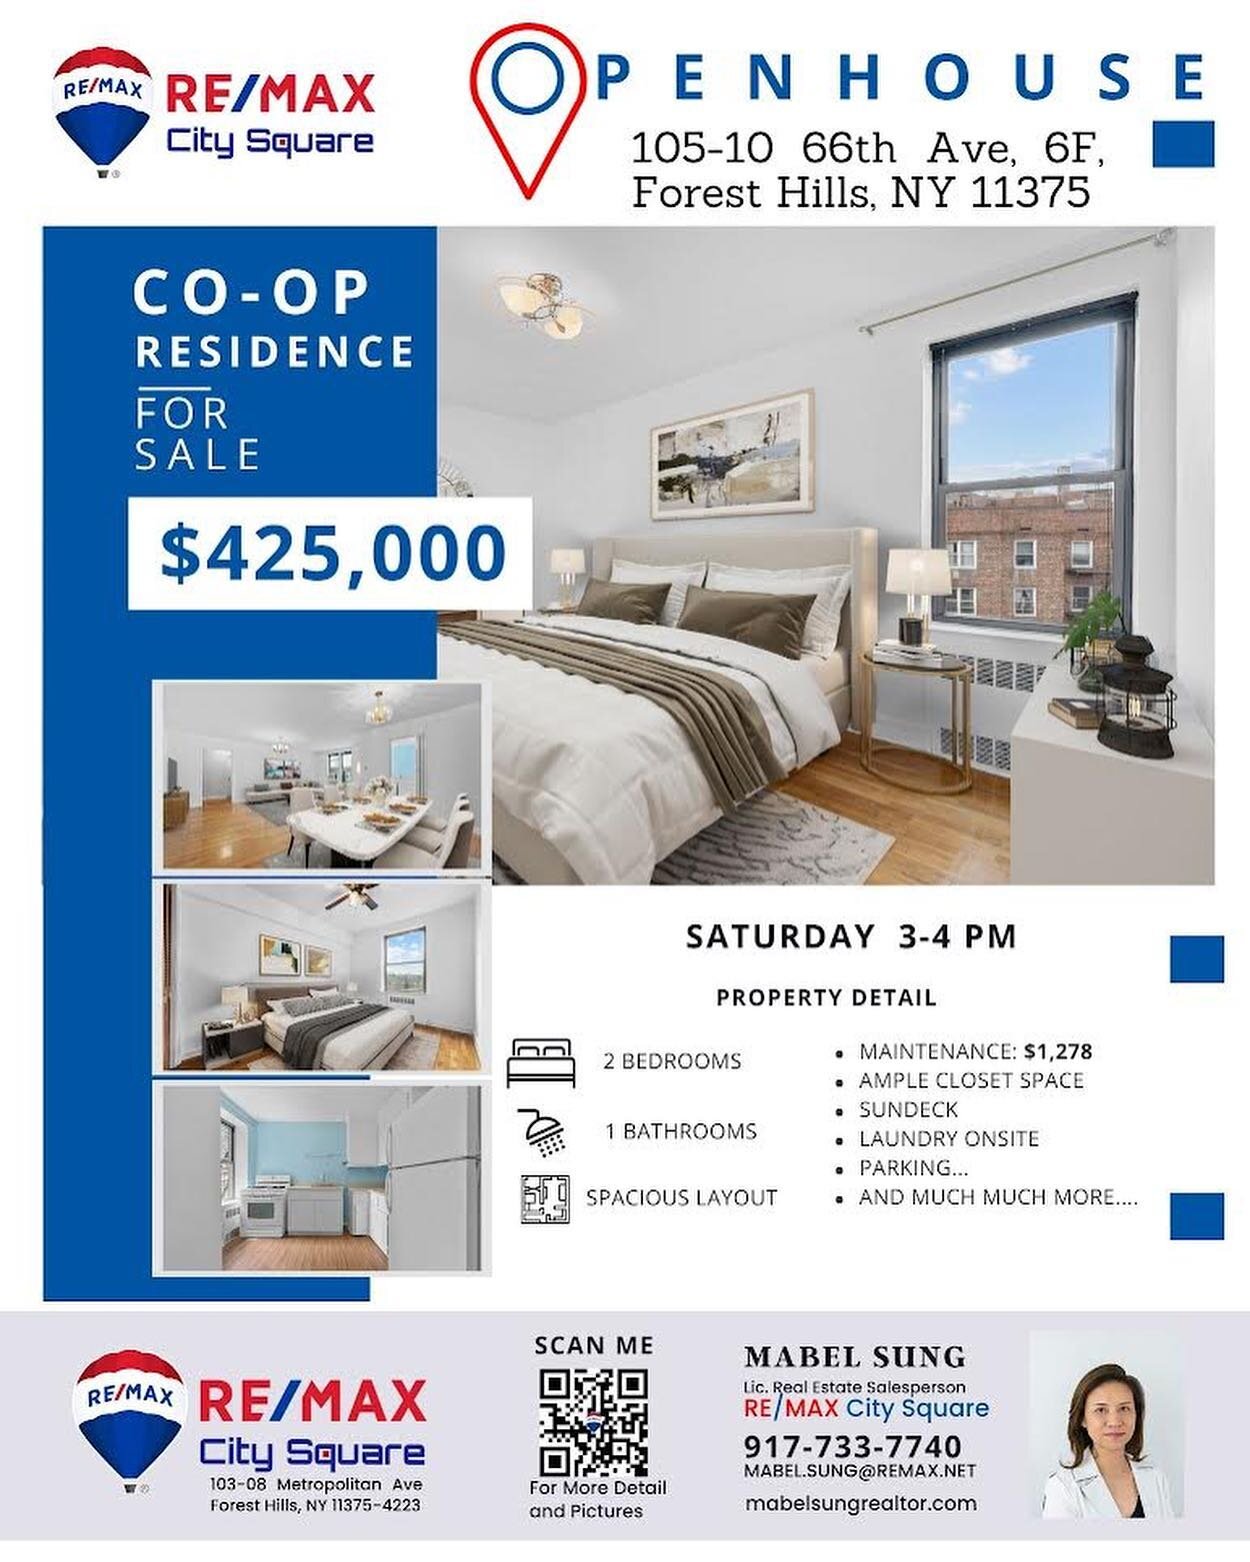 #openhouse #queens #foresthills #newyorkrealestate #apartments #2bedroomapartment #apartment #forsale #petfriendly #remax